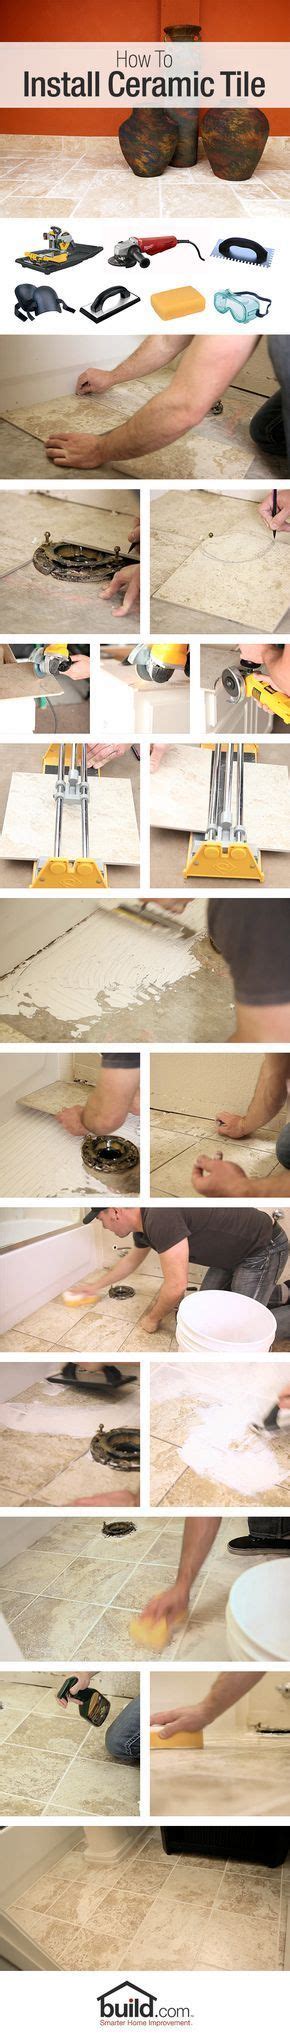 Ceramic tile is a popular option in bathrooms, kitchens and entryways because it's durable, relatively low cost and easy to maintain. How to Install Ceramic Tile | Diy flooring, Diy tile ...